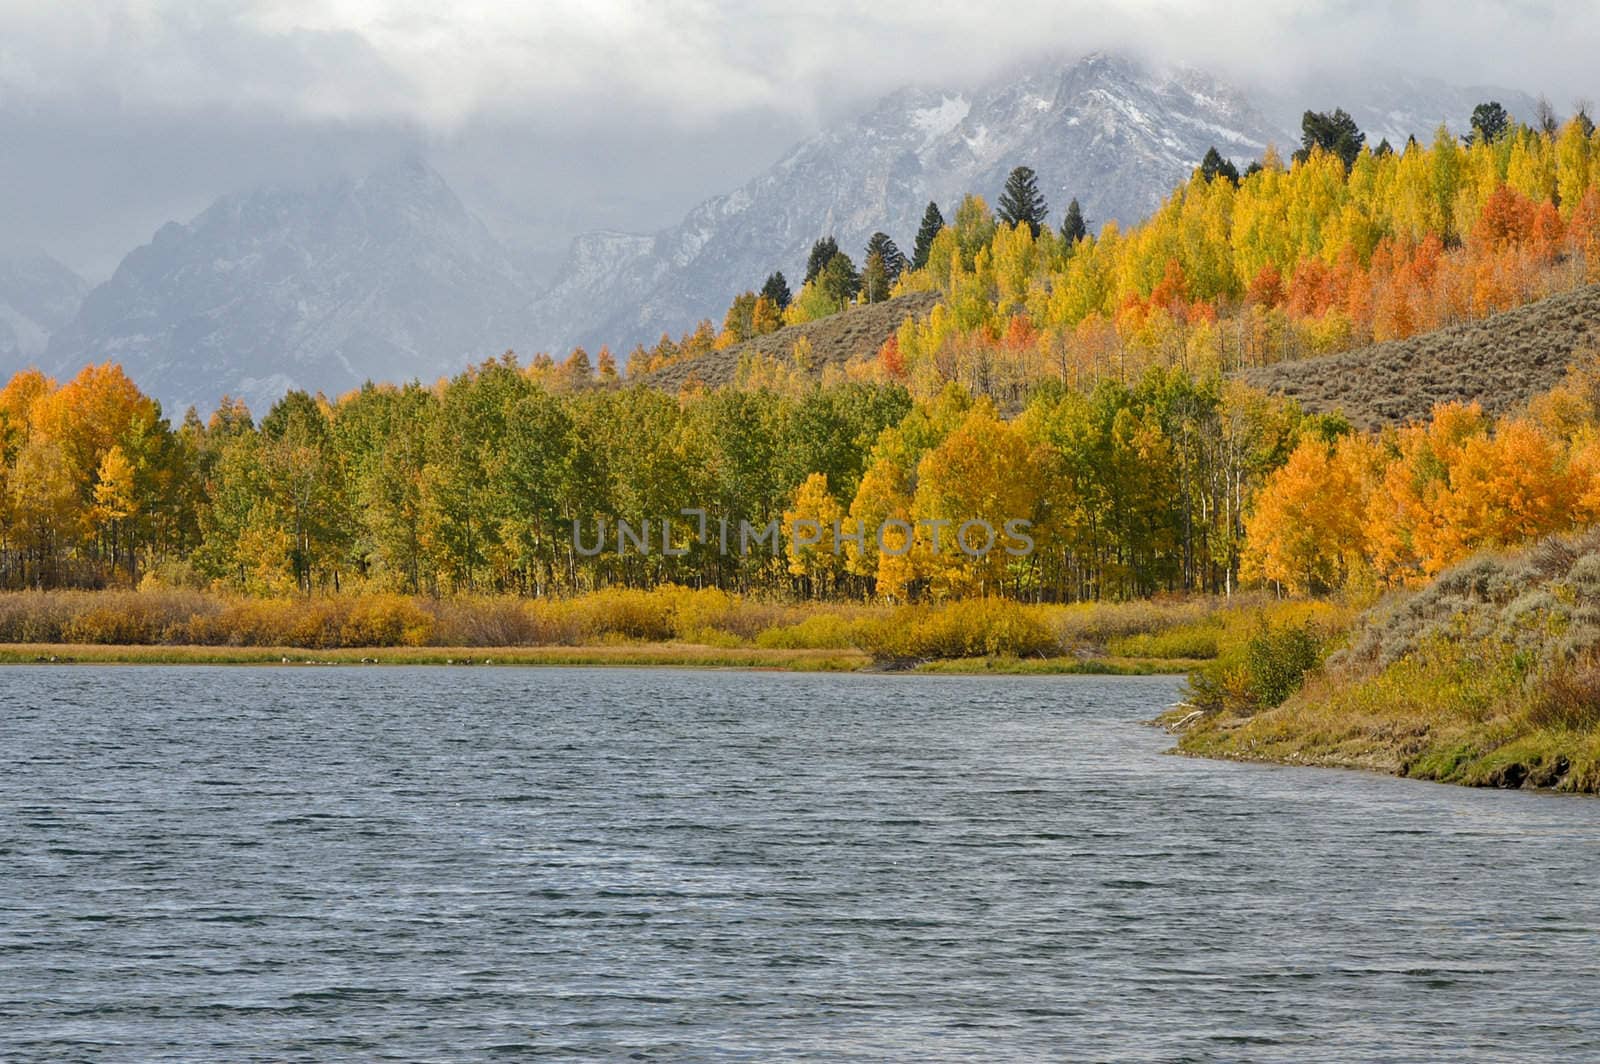 Tetons decked in Fall colors